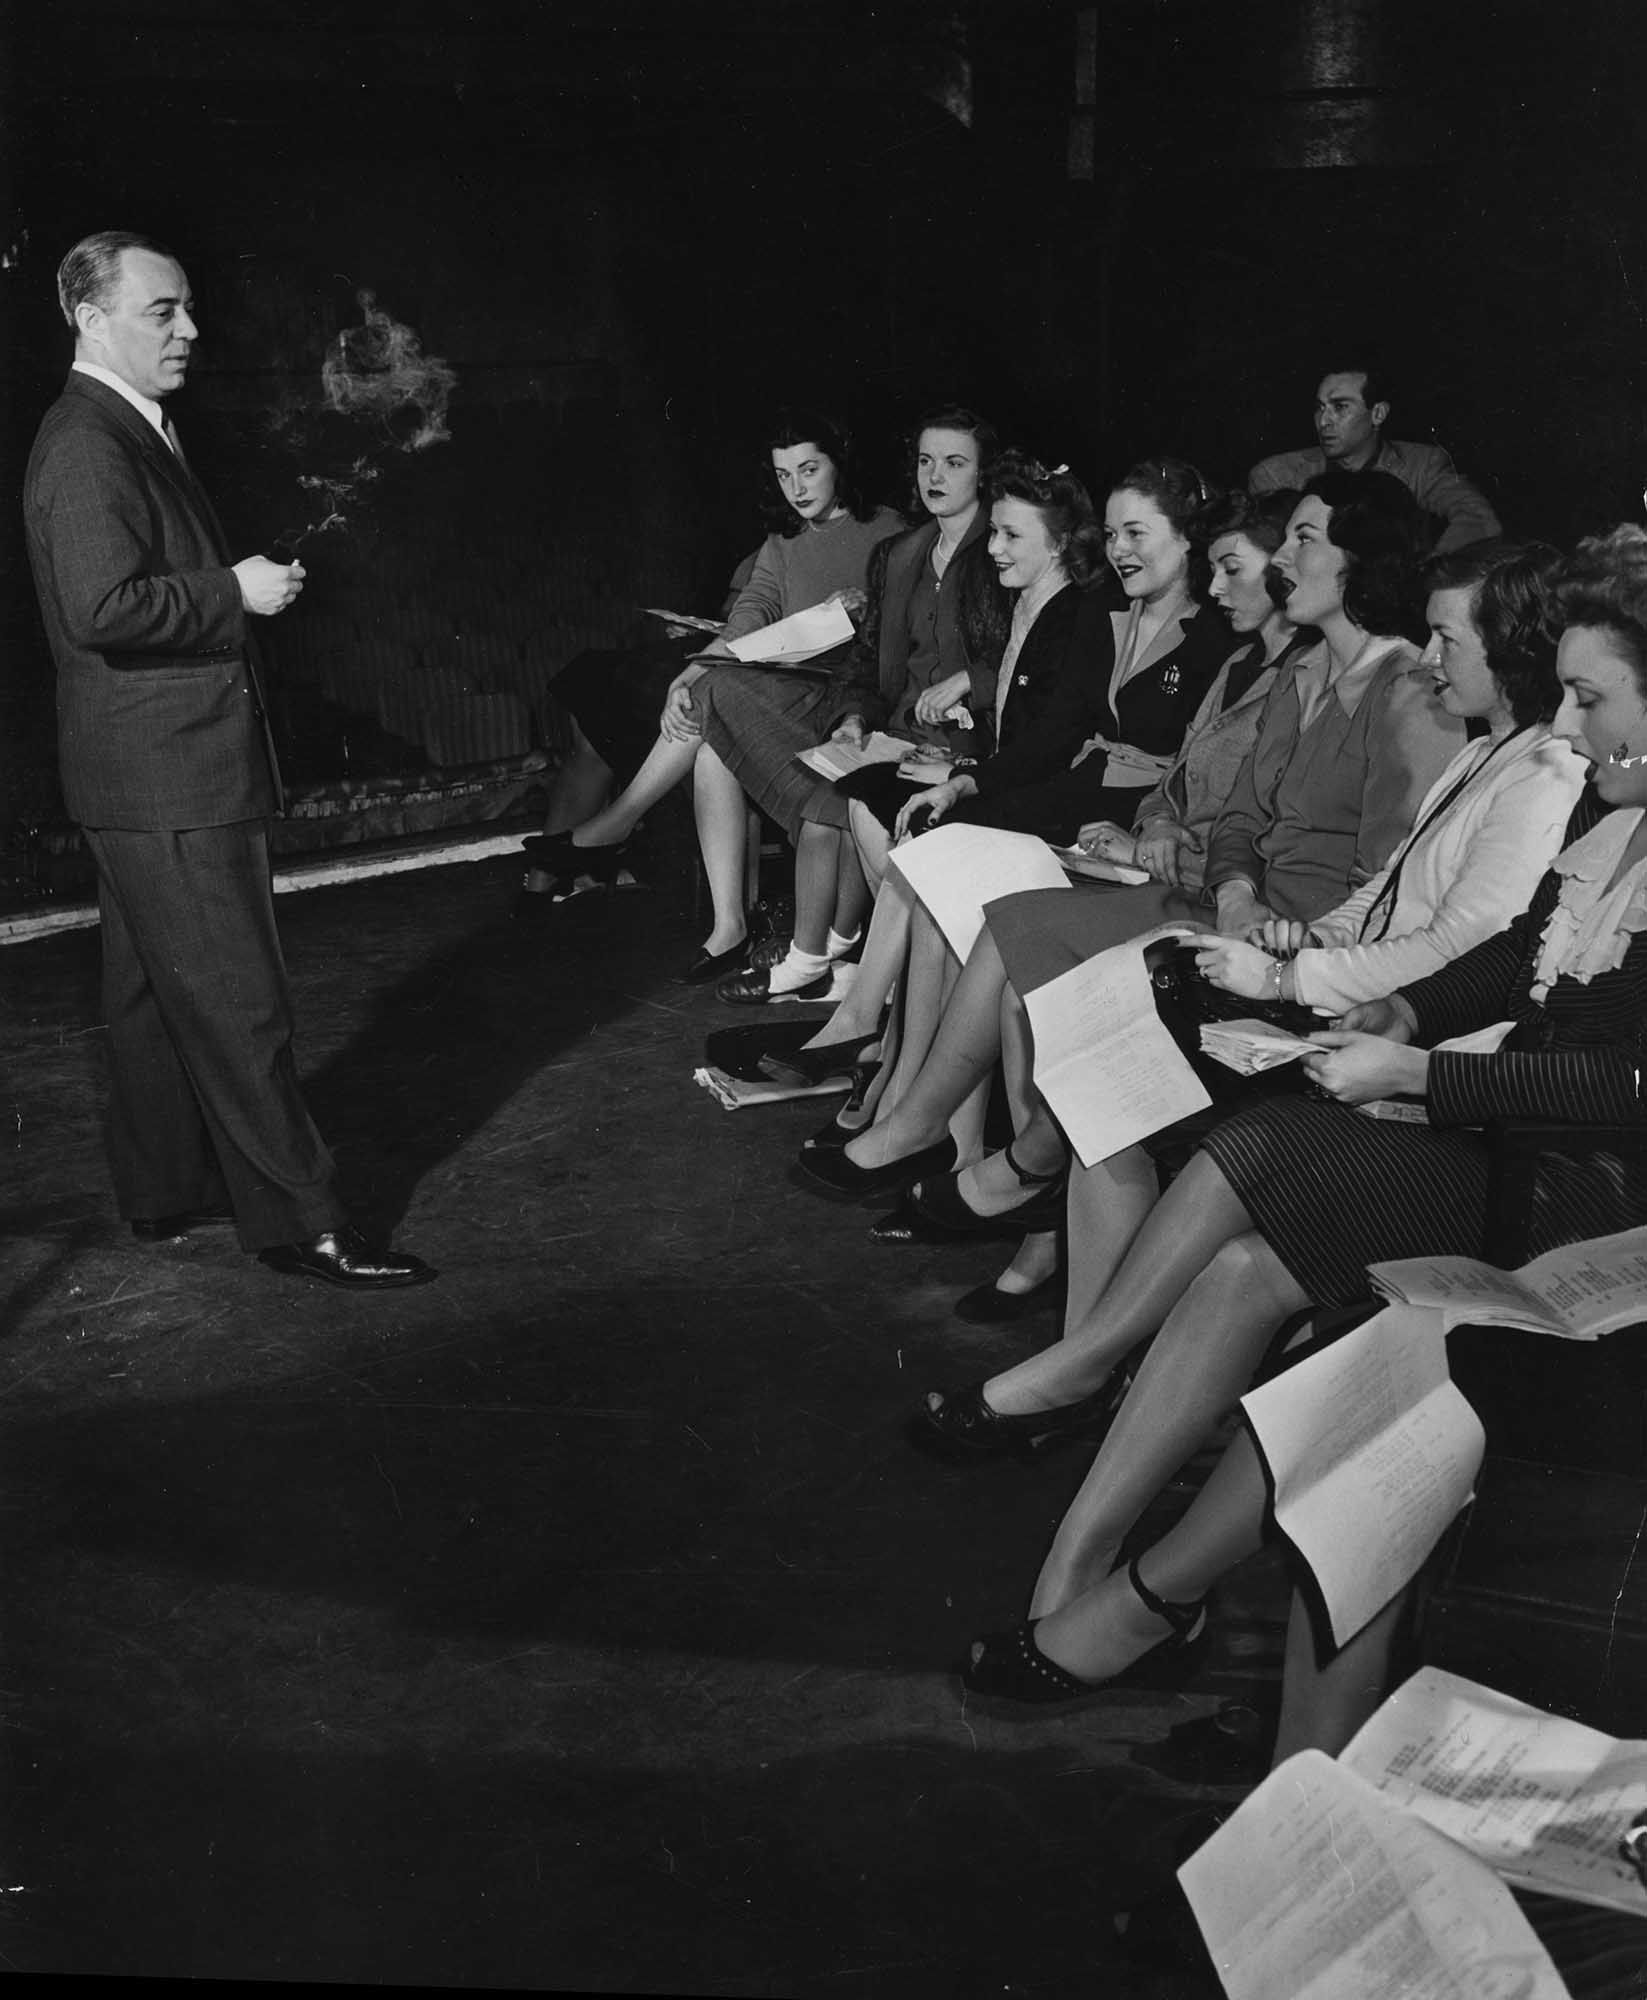 A photo from the 1947 Broadway rehearsals of Allegro.